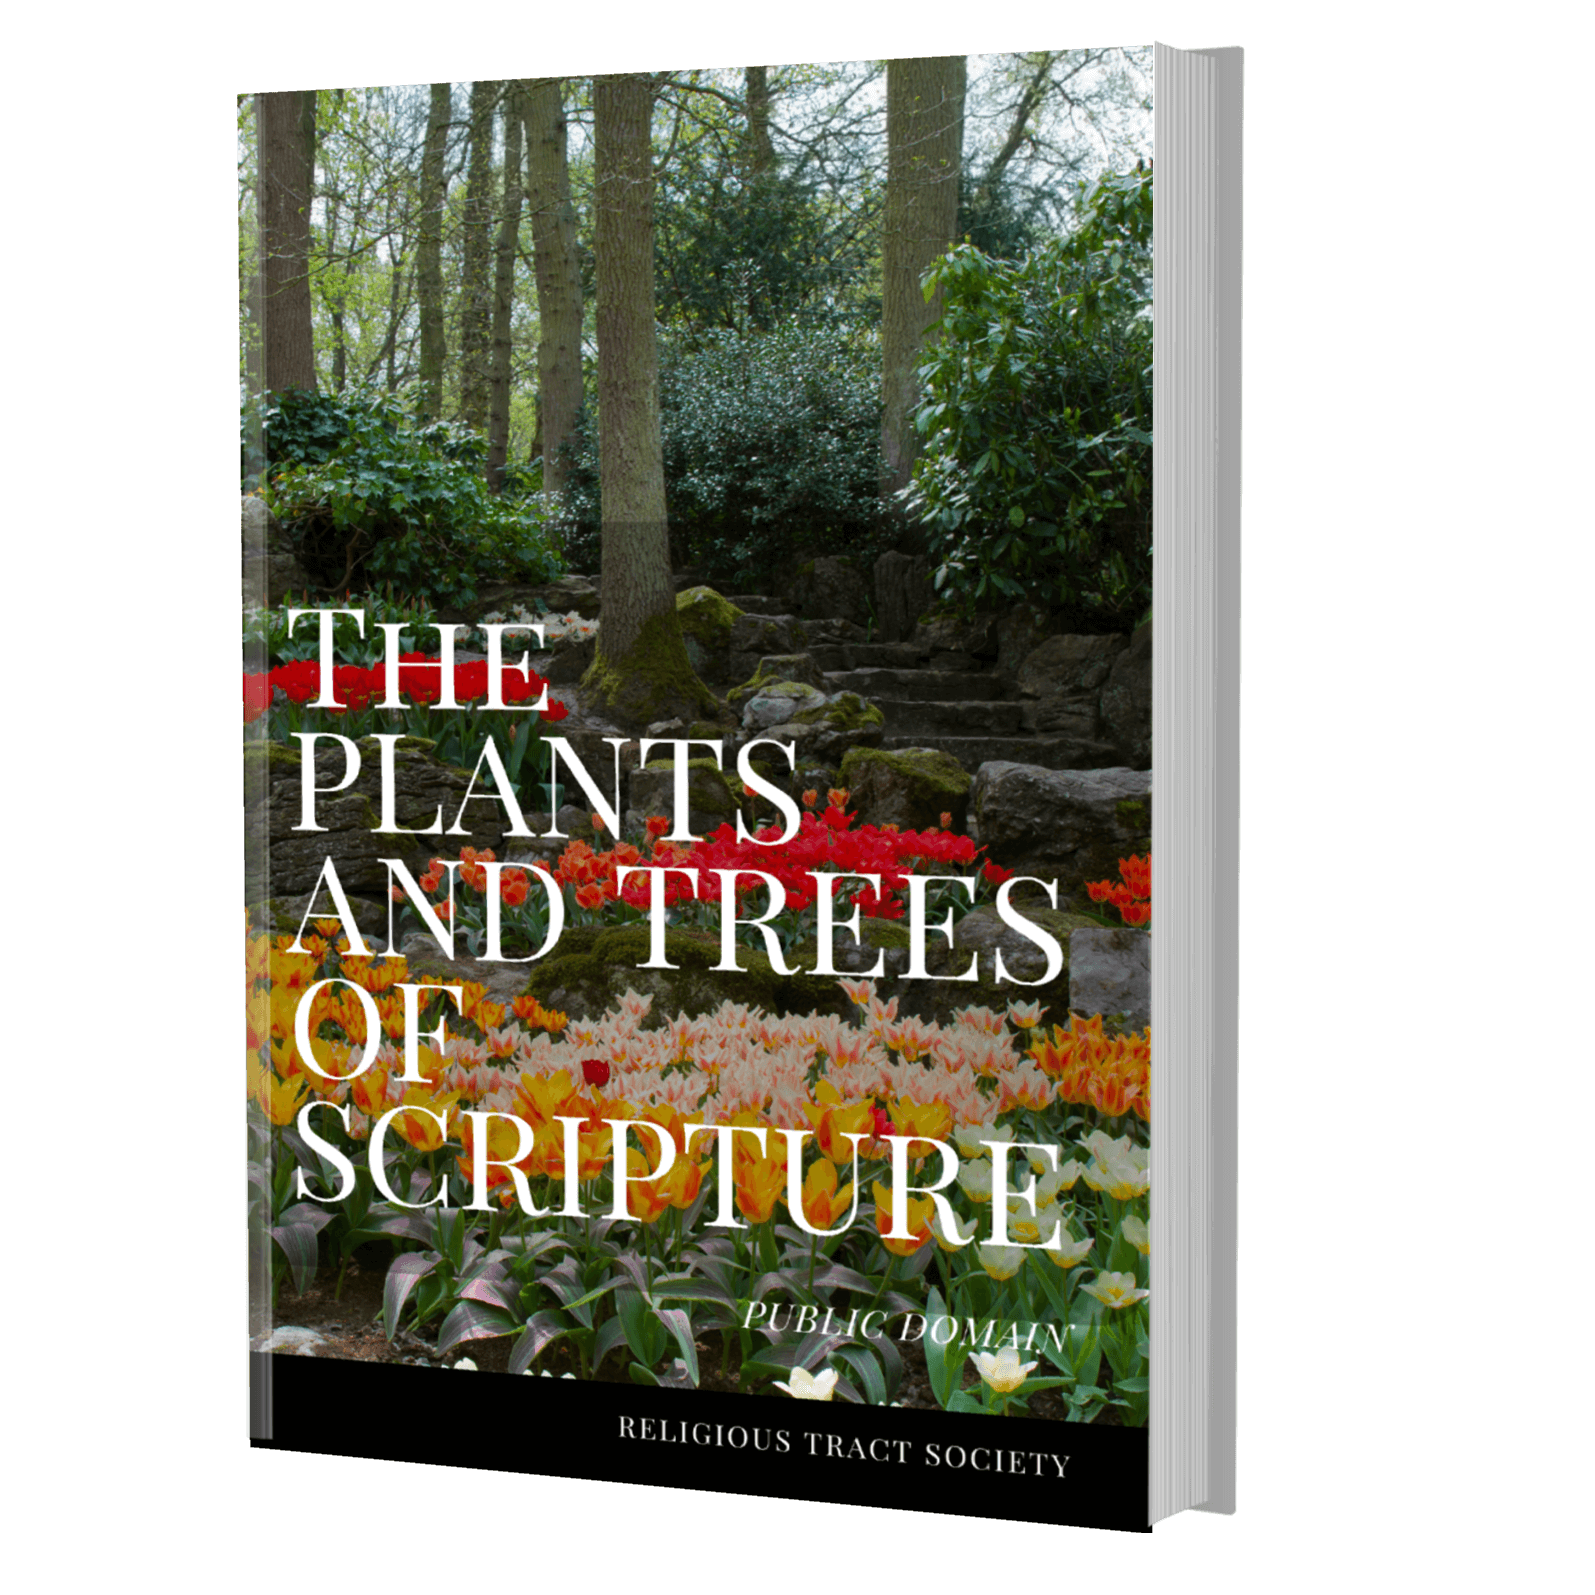 The plants and trees of scripture book softback